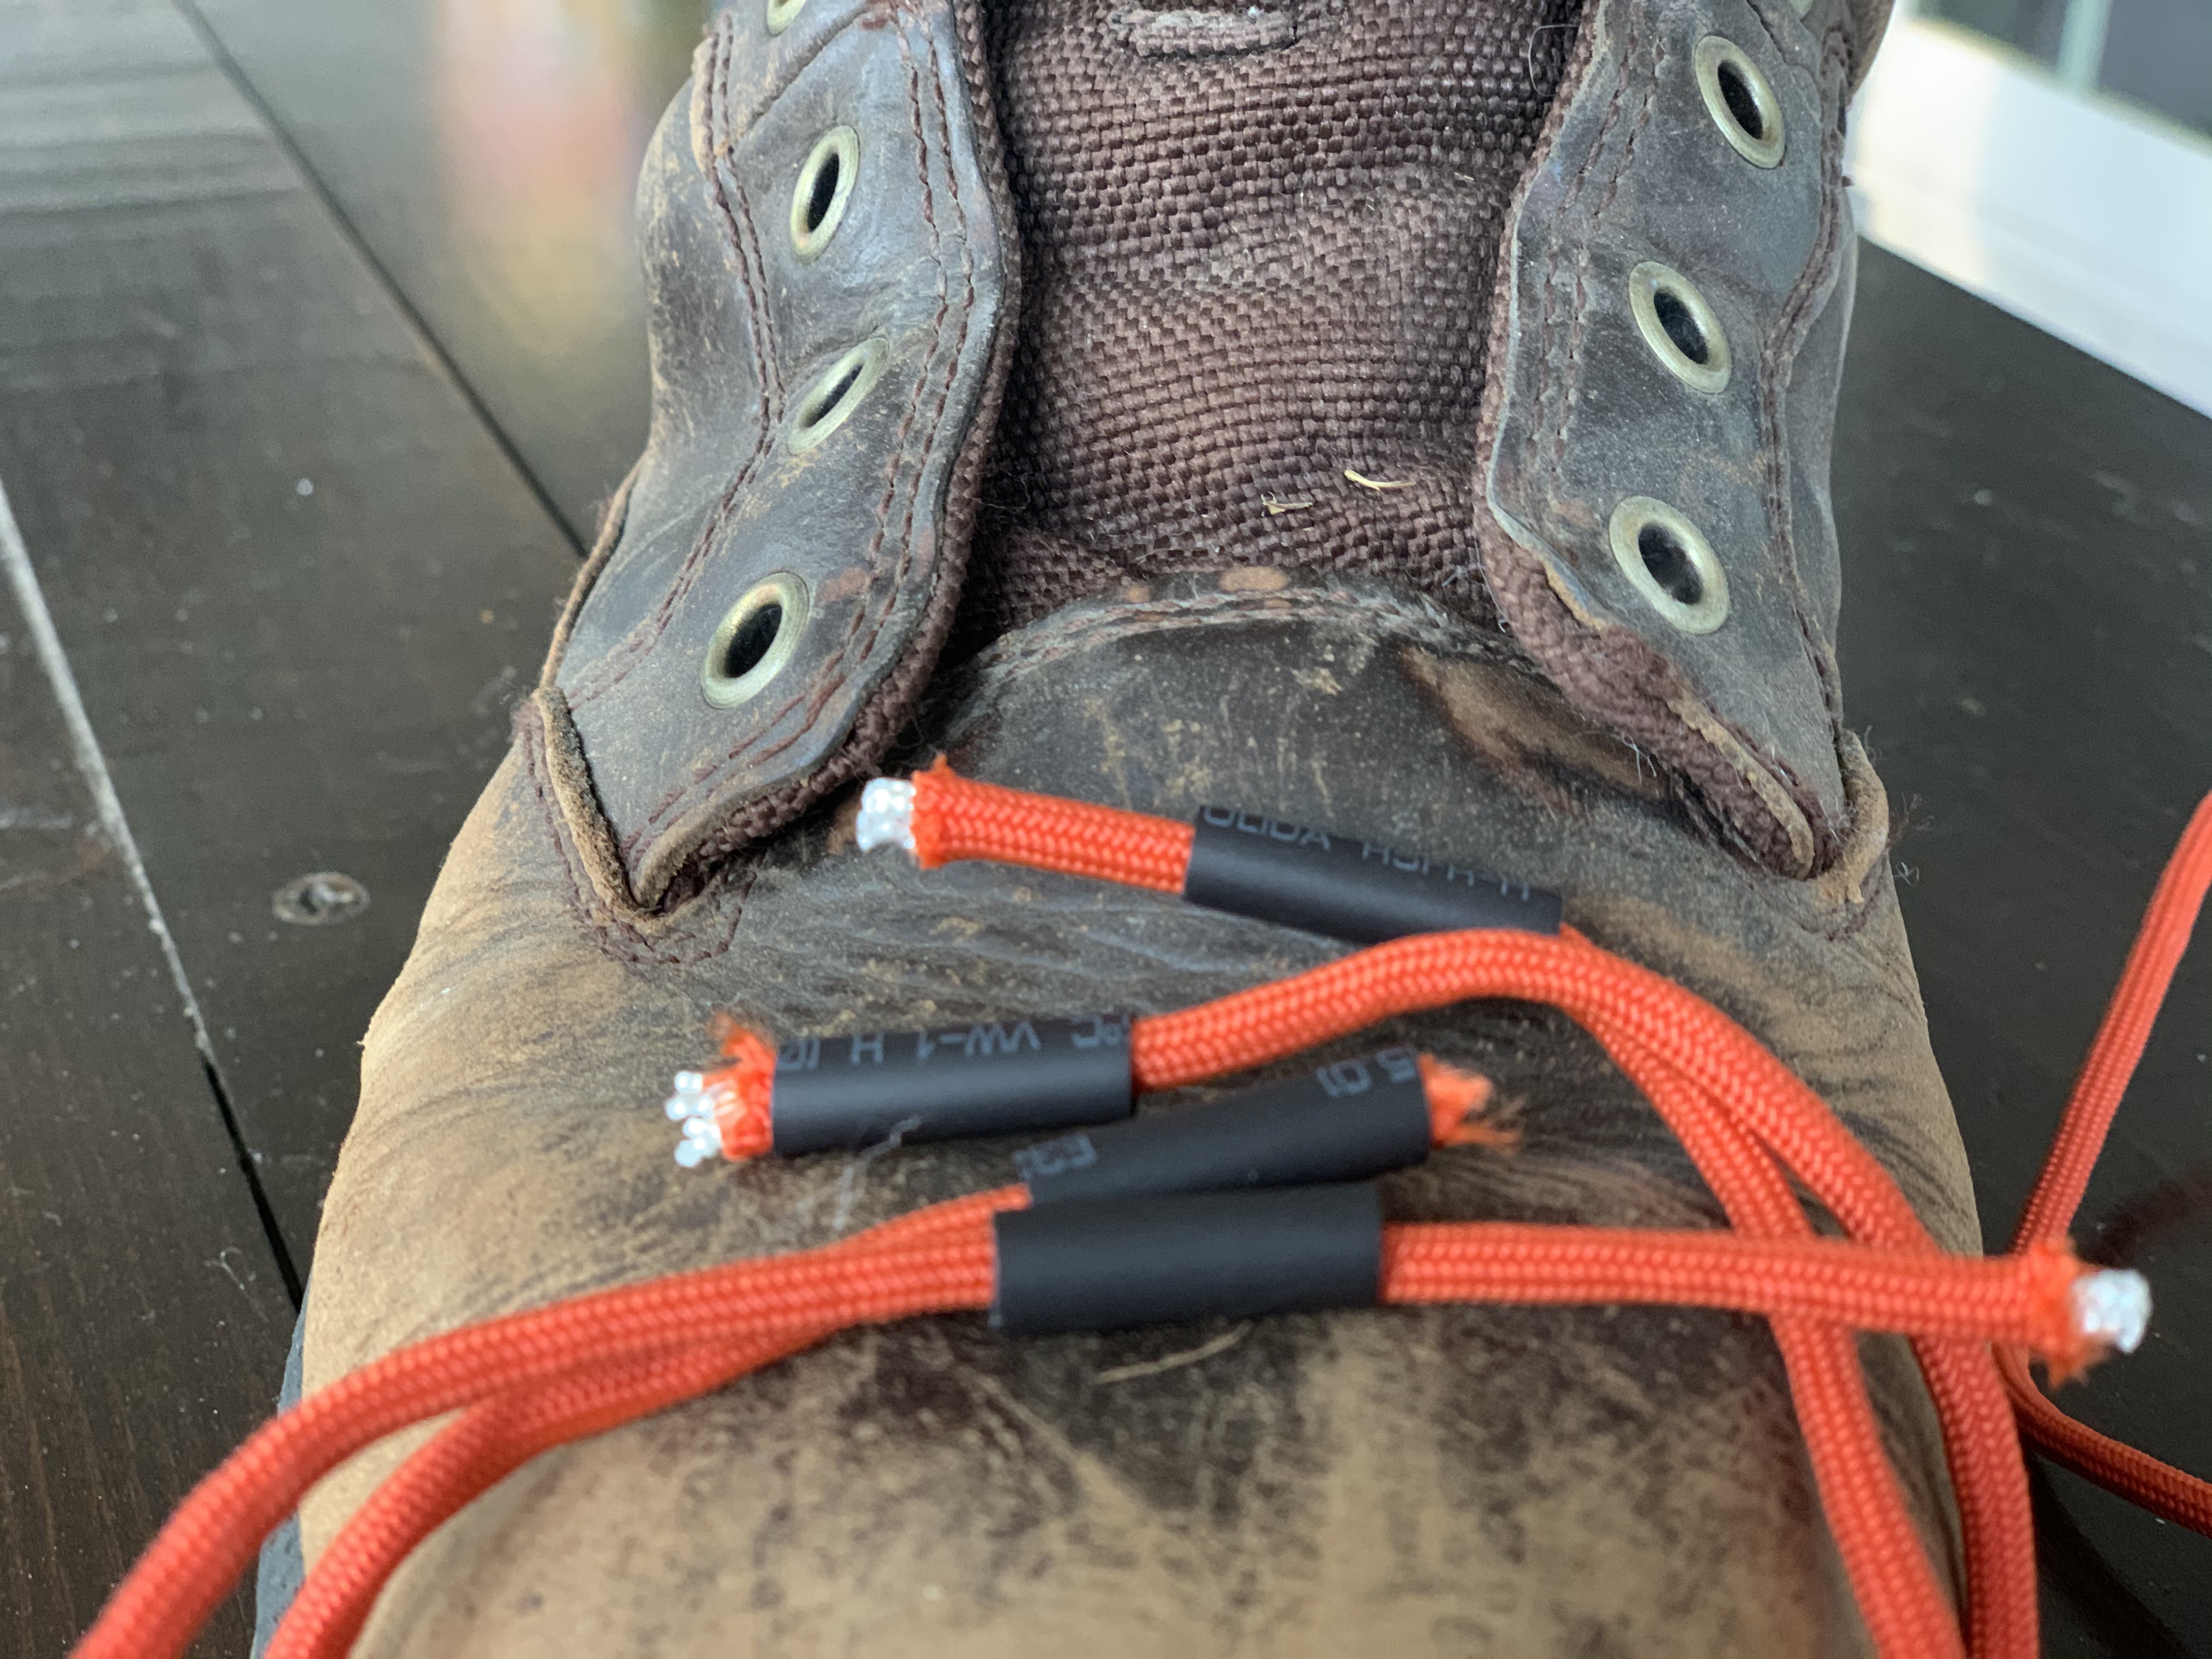 heat shrink tubing on paracord for shoelaces